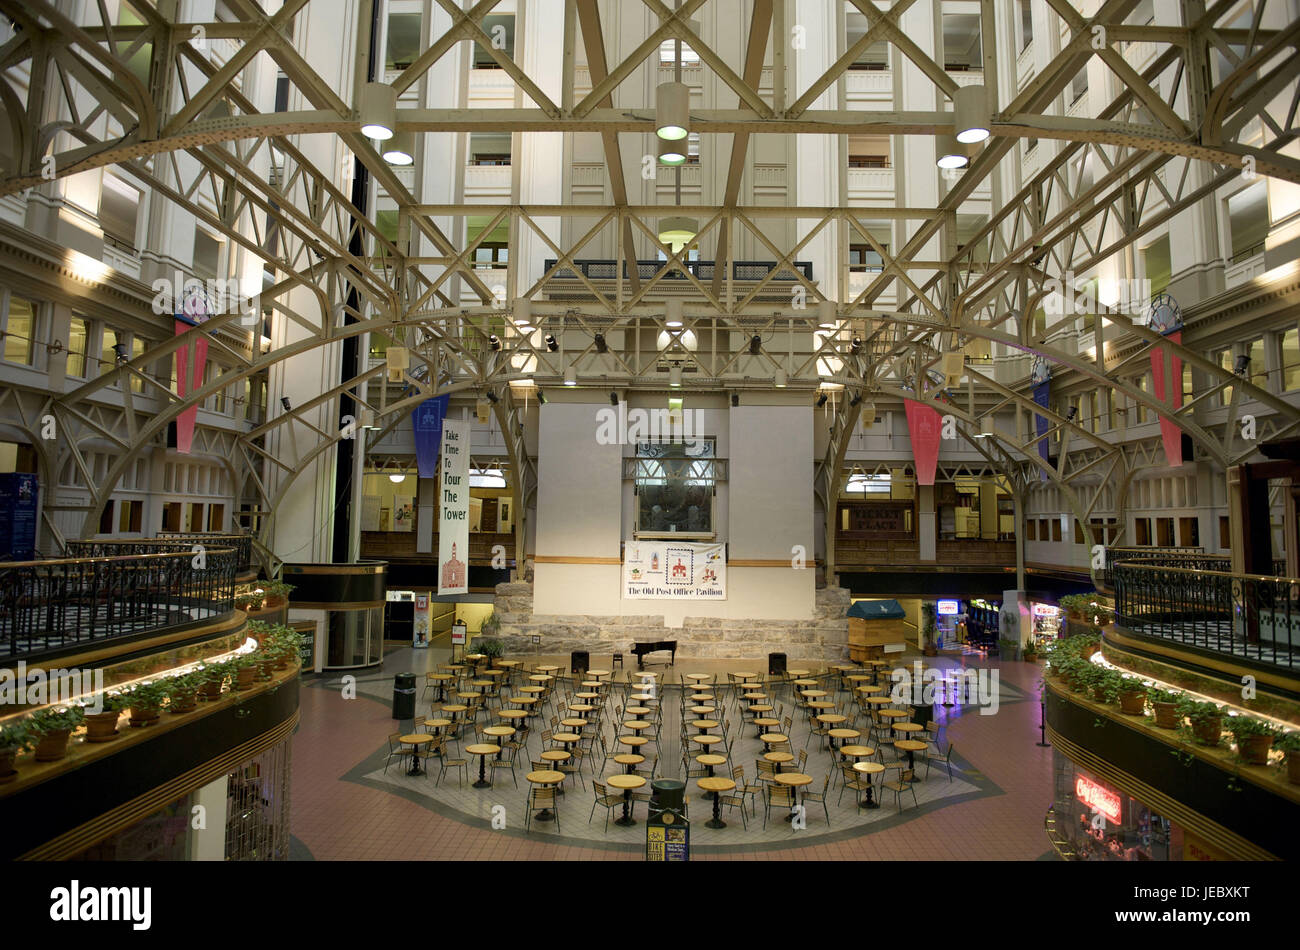 The USA, America, Washington D.C, Down Town, restaurant in the interior of the old post-office building, Stock Photo